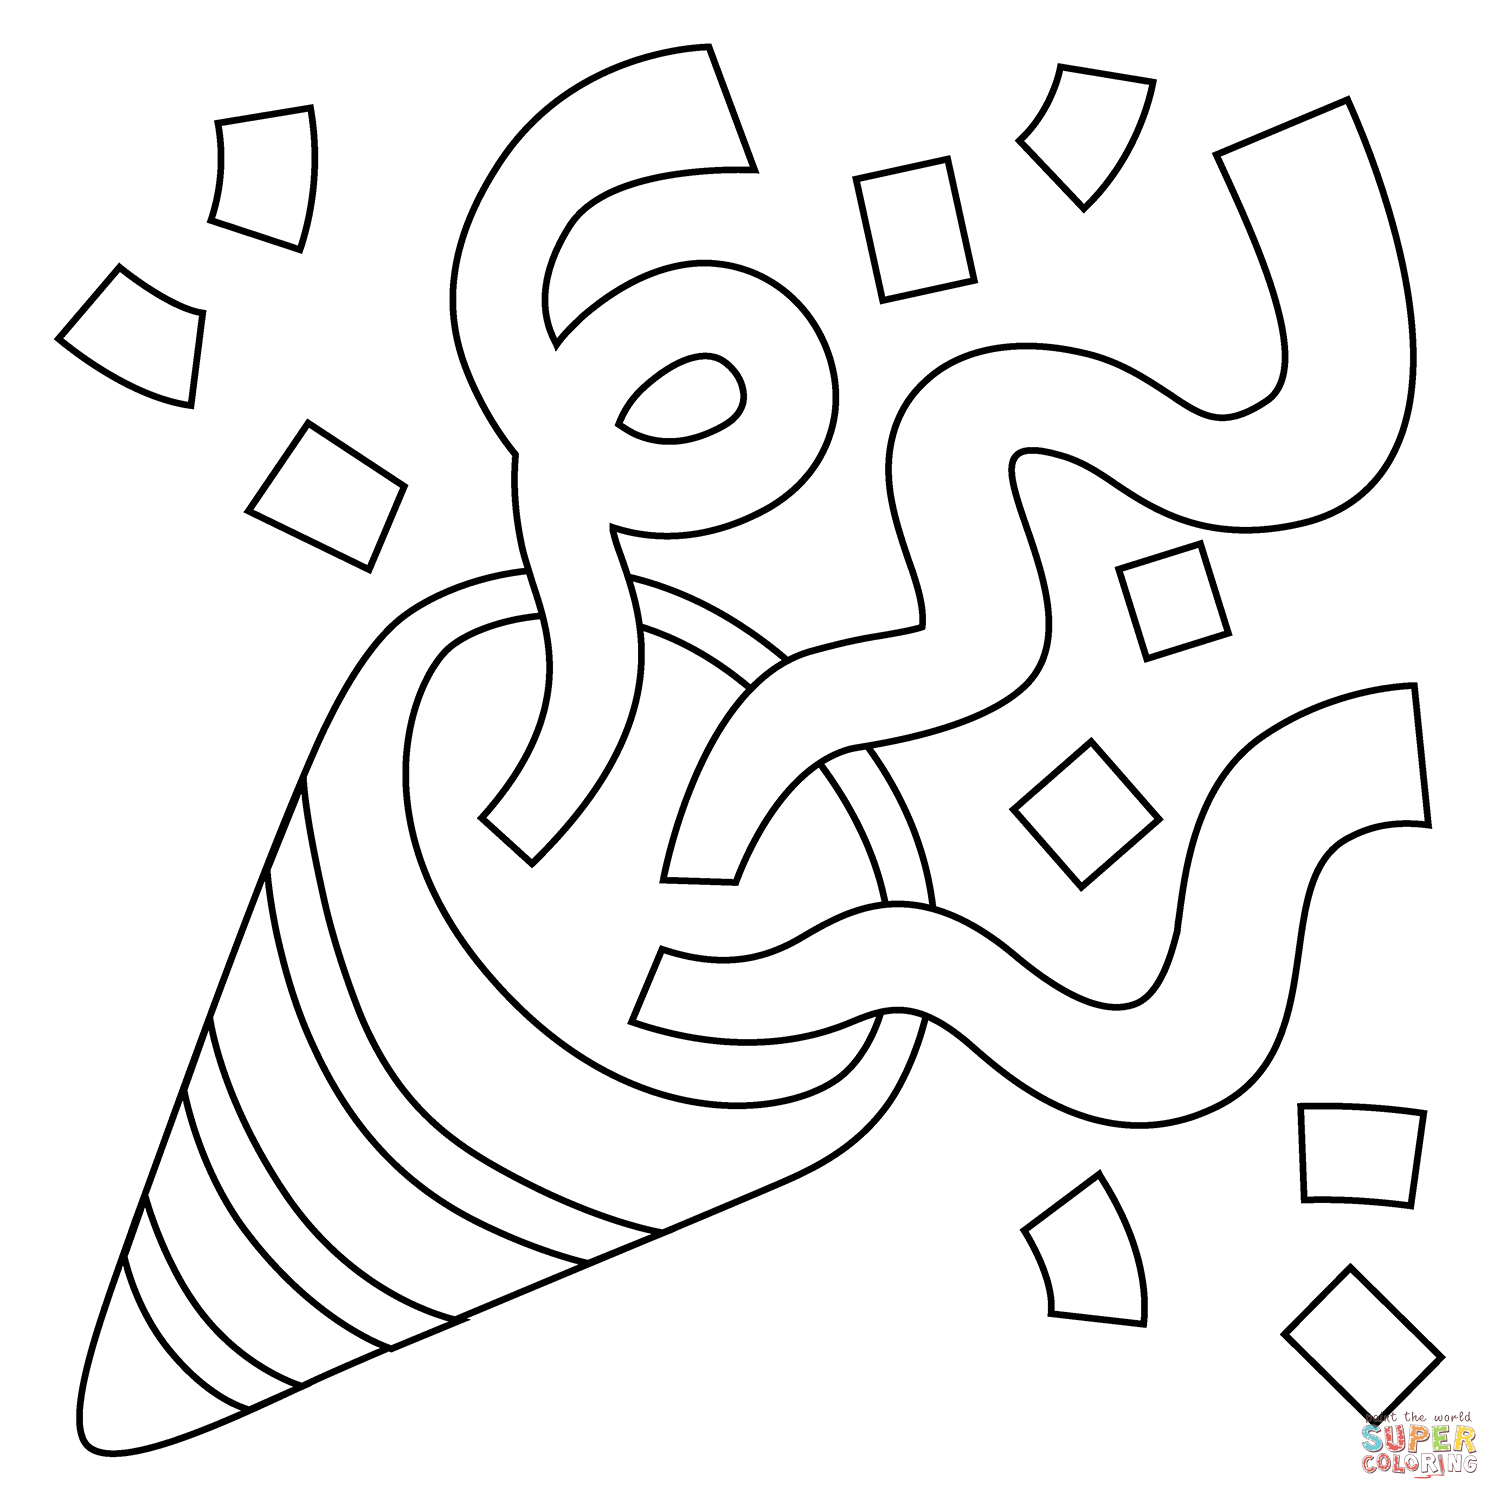 Party popper emoji coloring page free printable coloring pages